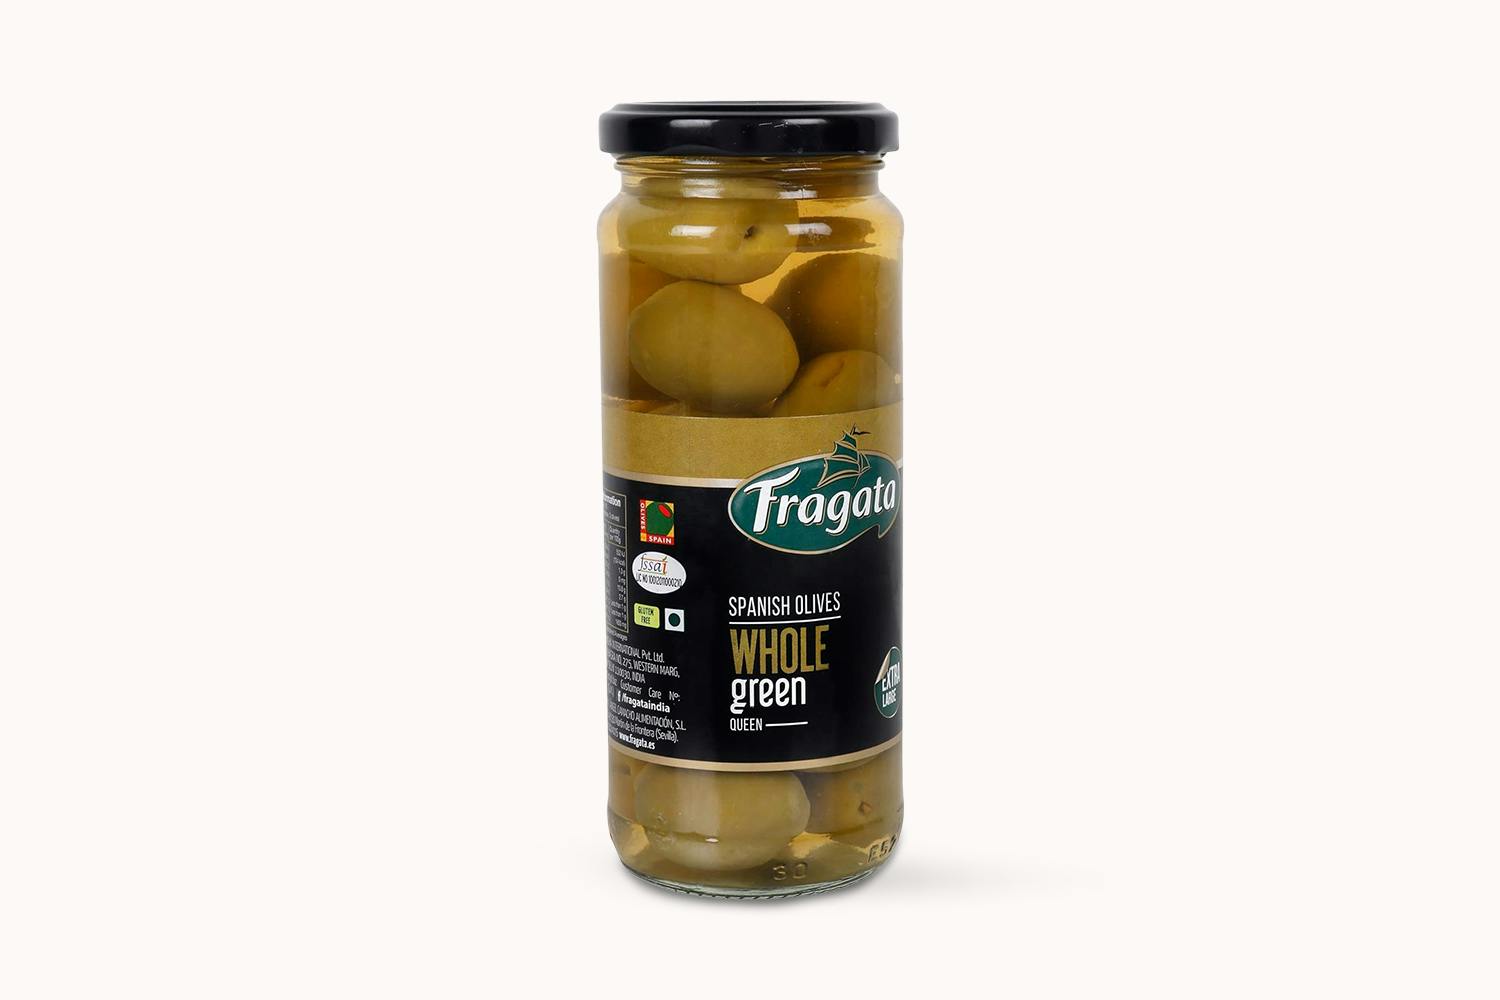 Fragata Spanish Olives - Whole Green Queen